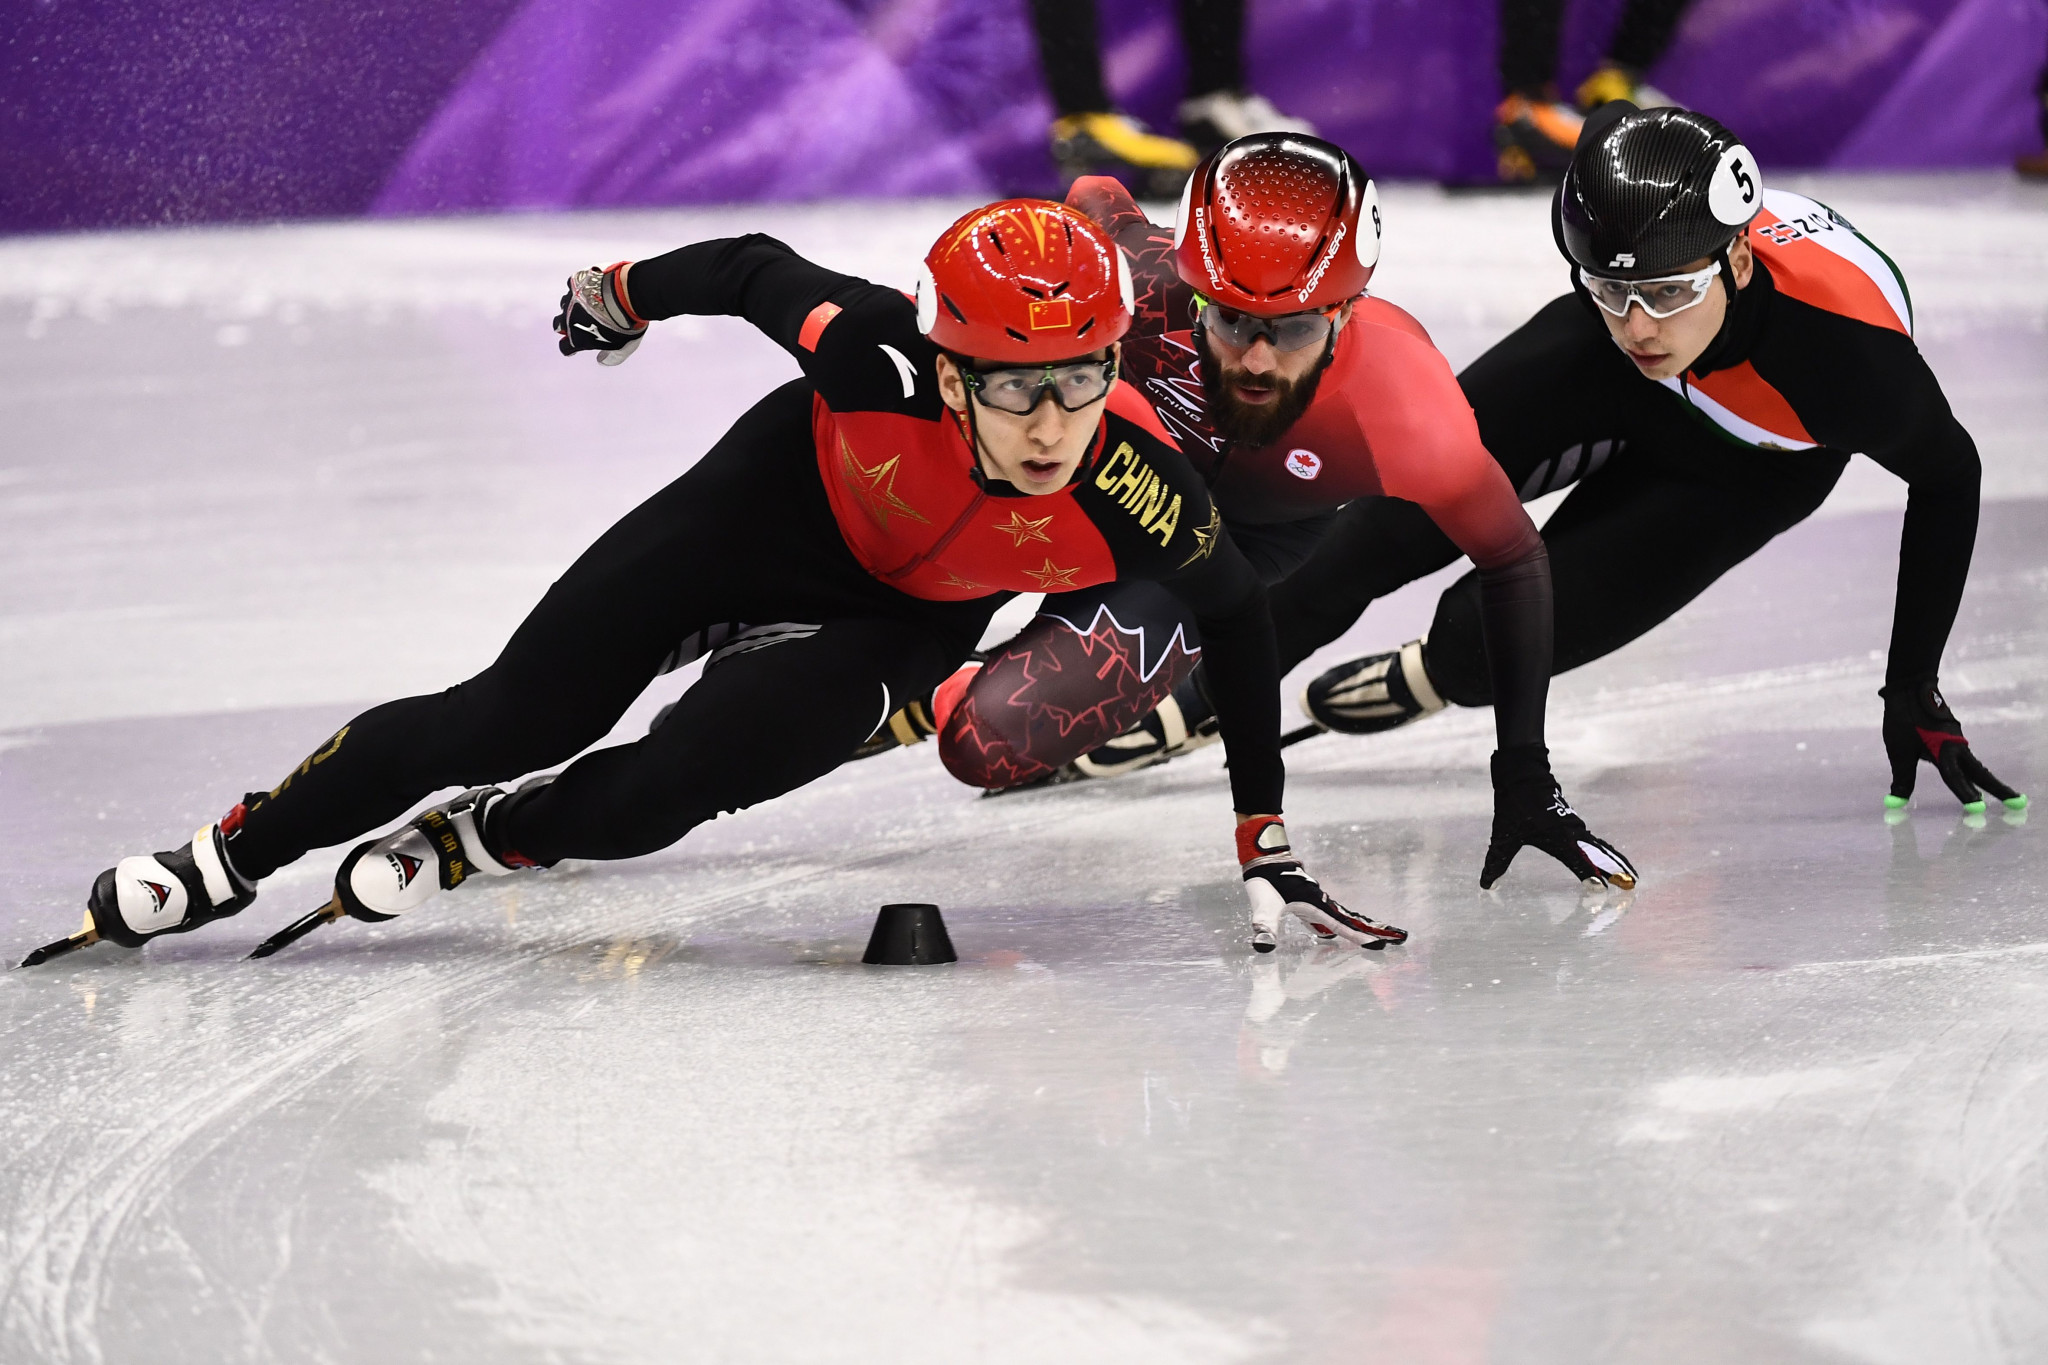 Nearly all of China's Winter Olympic gold medals have come on ice skates ©Getty Images
